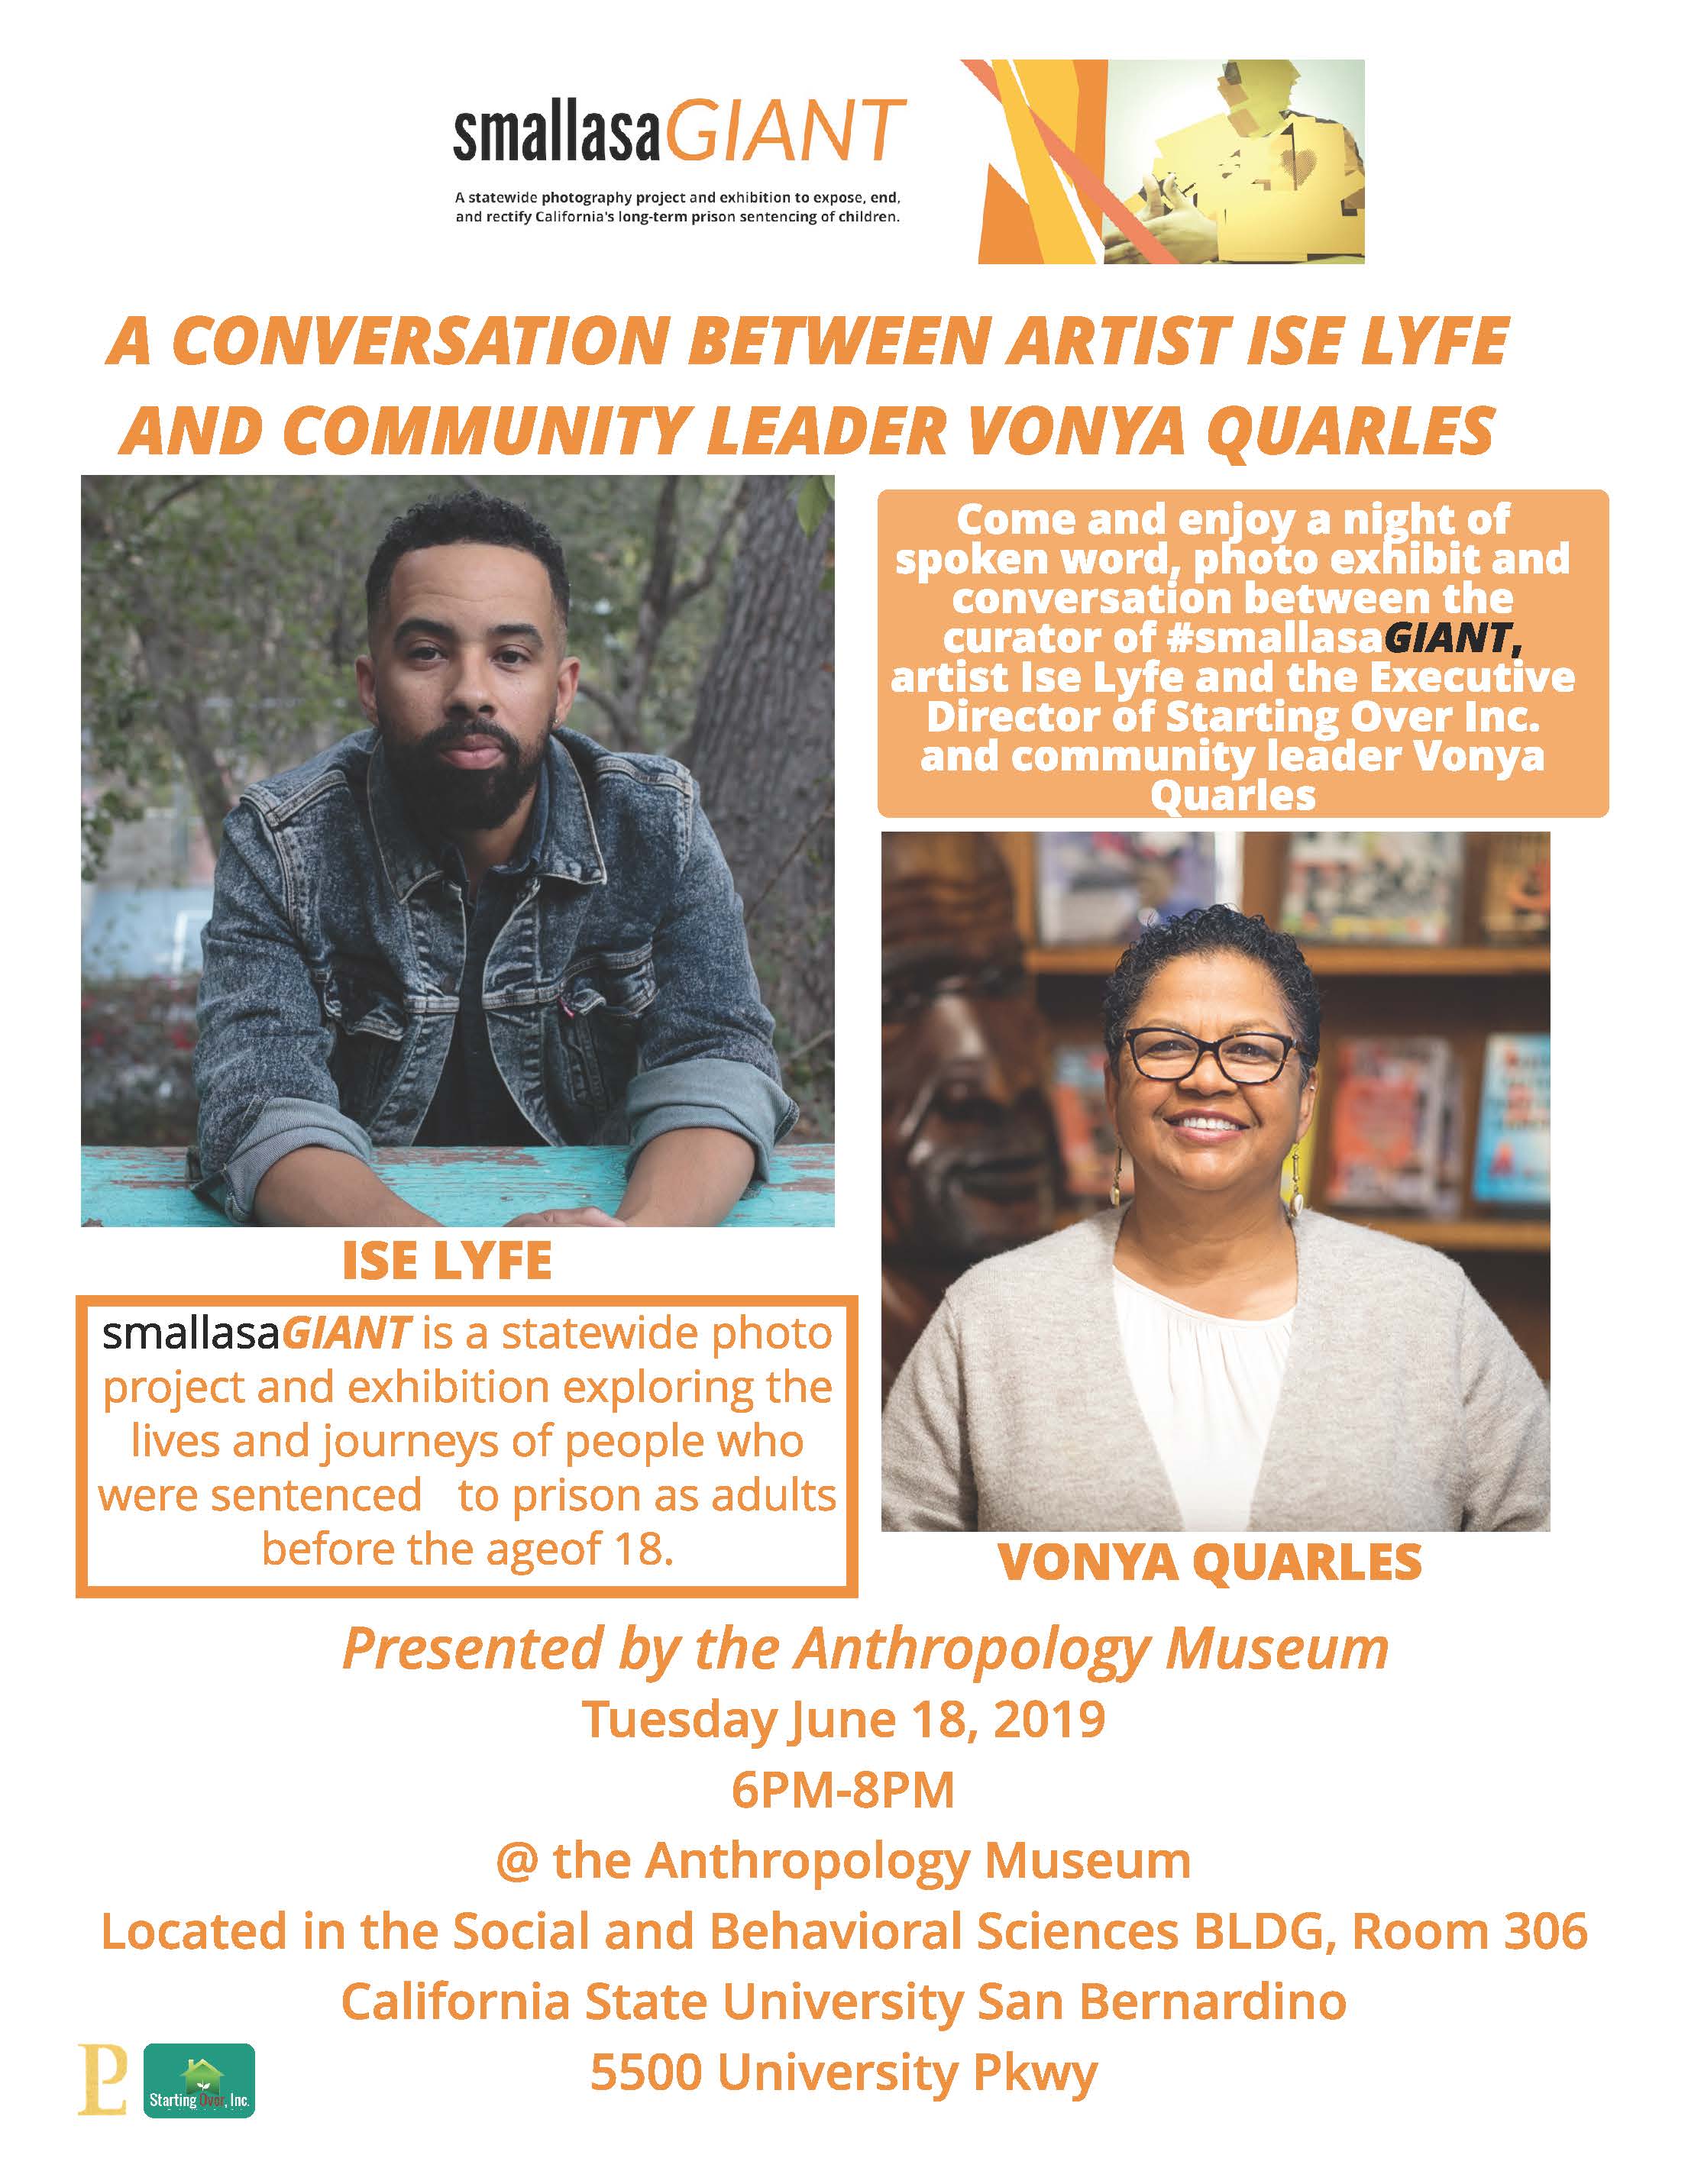 A conversation between curator/artist Ise Lyfe and community leader Vonya Quarles will highlight the closing reception for the exhibit “smallasaGIANT” at the Cal State San Bernardino Anthropology Museum on Tuesday, June 18.